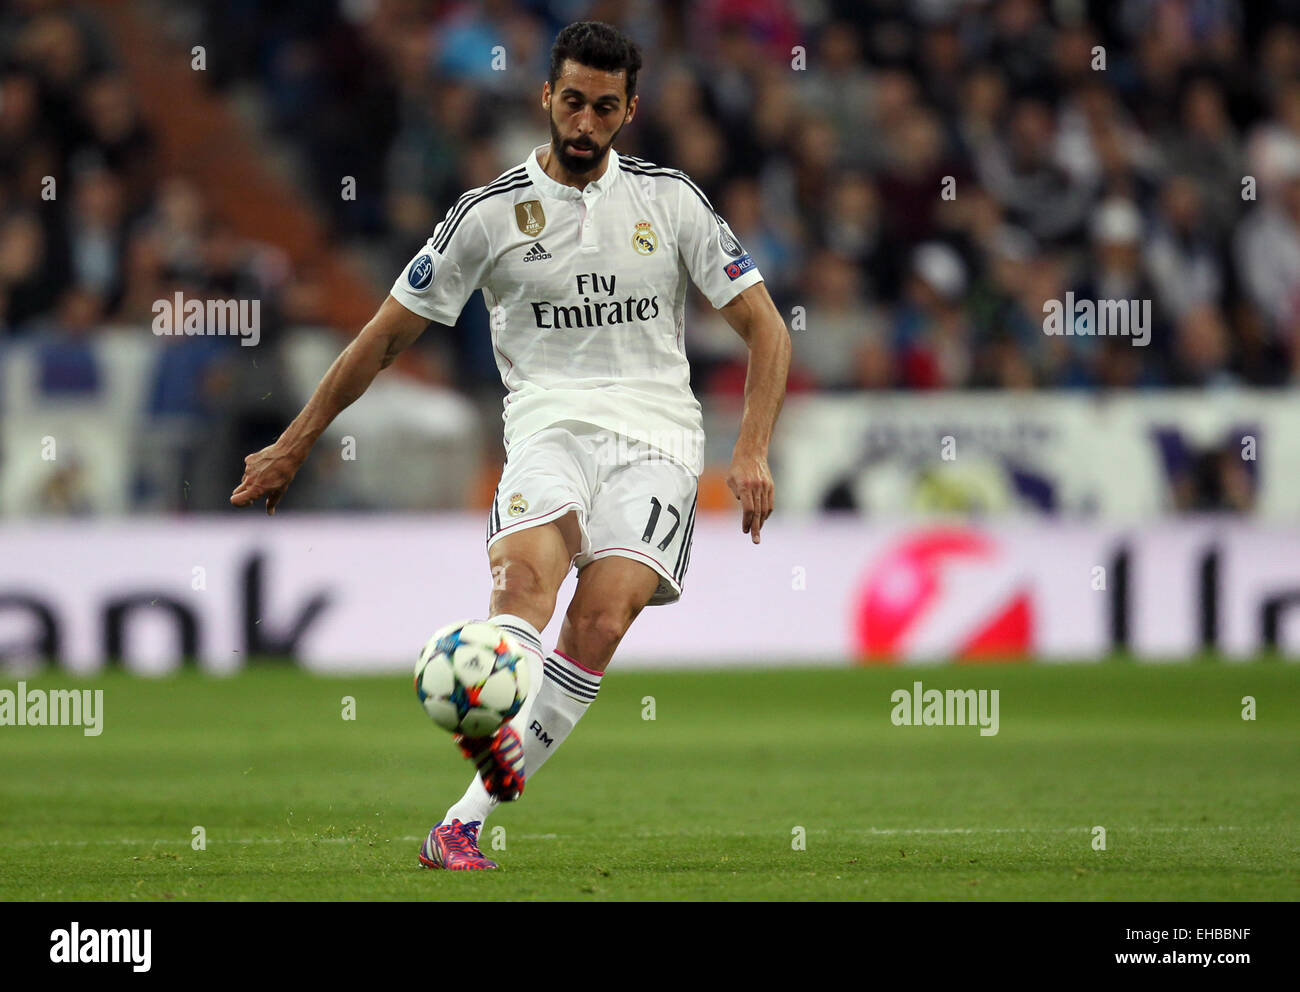 Madrid, Spain. 10th Mar, 2015. Real Madrid's Alvaro Arbeloa kicks a ball during the UEFA Champions League Round of 16 second leg soccer match at Santiago Bernabeu Stadium in Madrid, Spain, 10 March 2015. Photo: Ina Fassbender/dpa/Alamy Live News Stock Photo